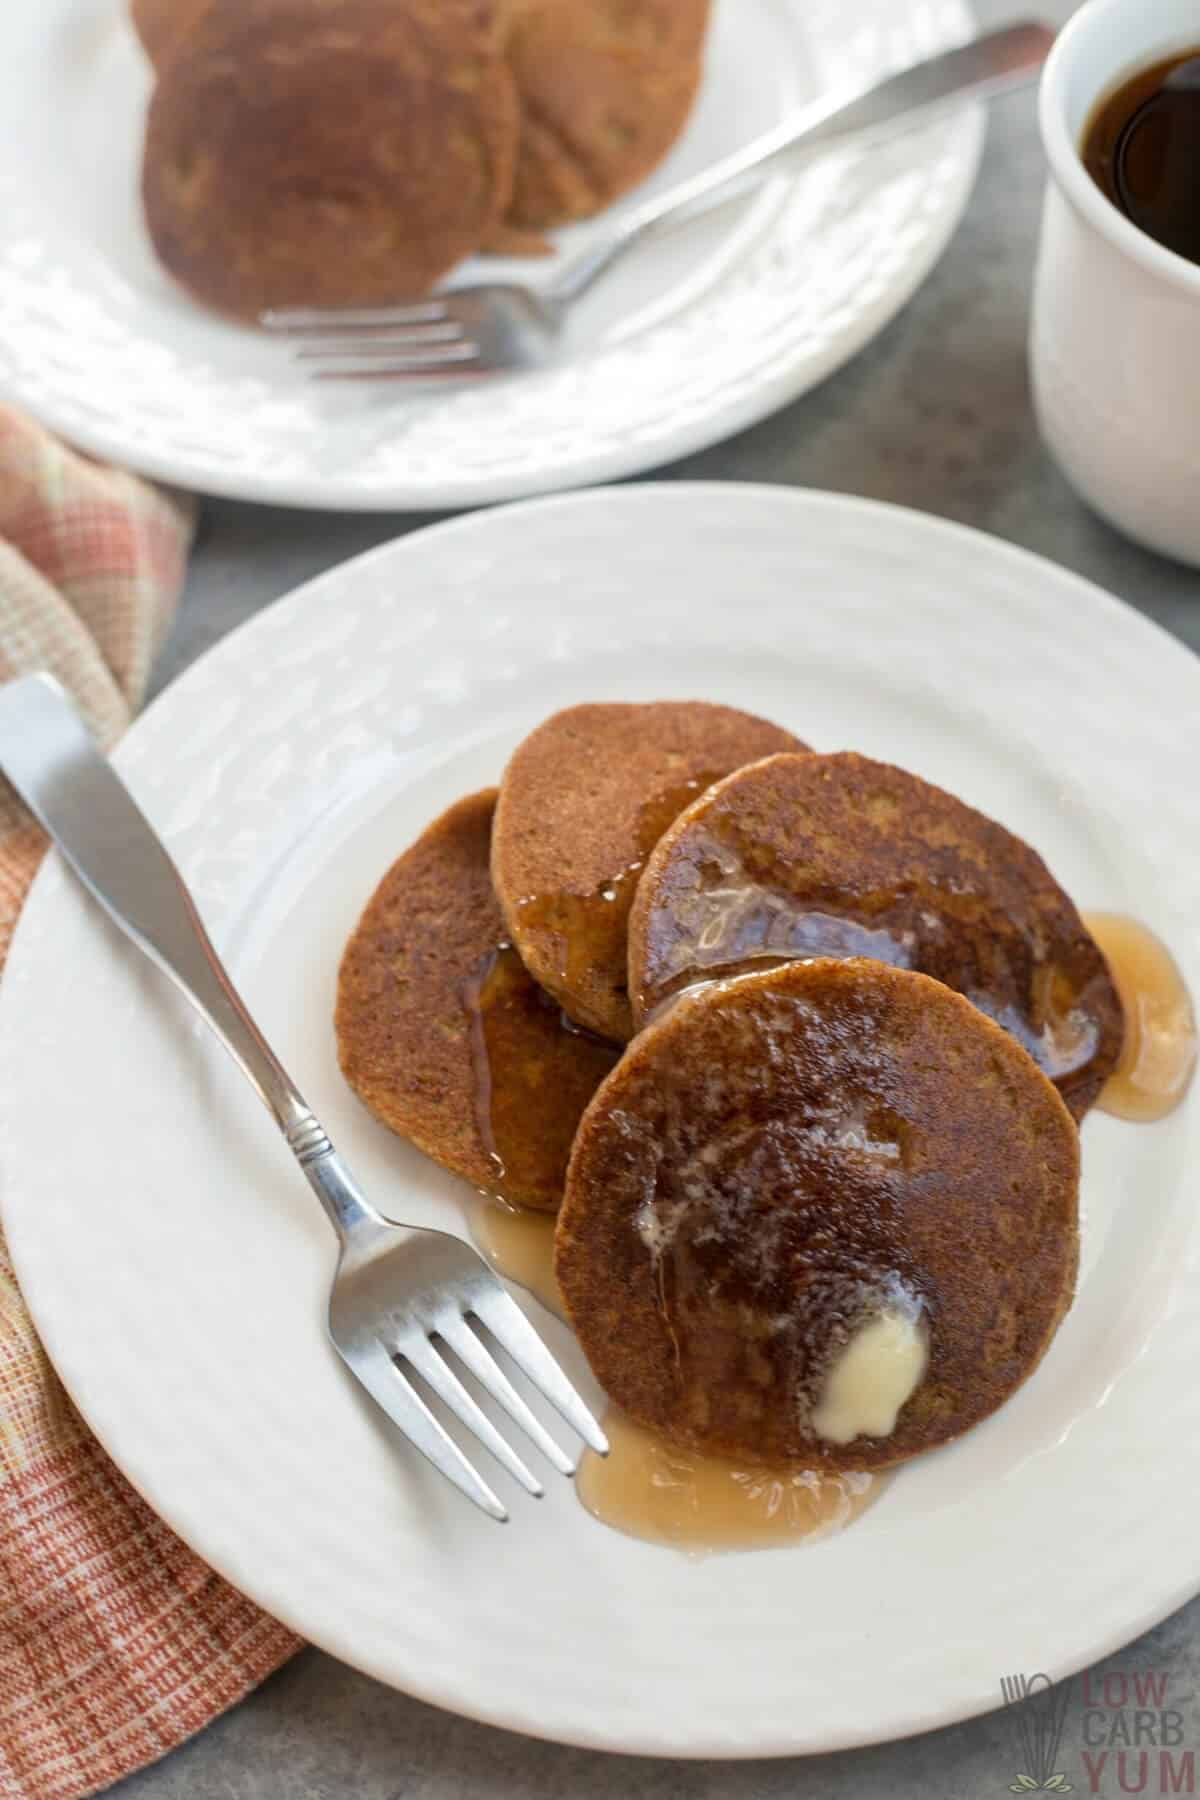 serving the low-carb pancakes with syrup and butter